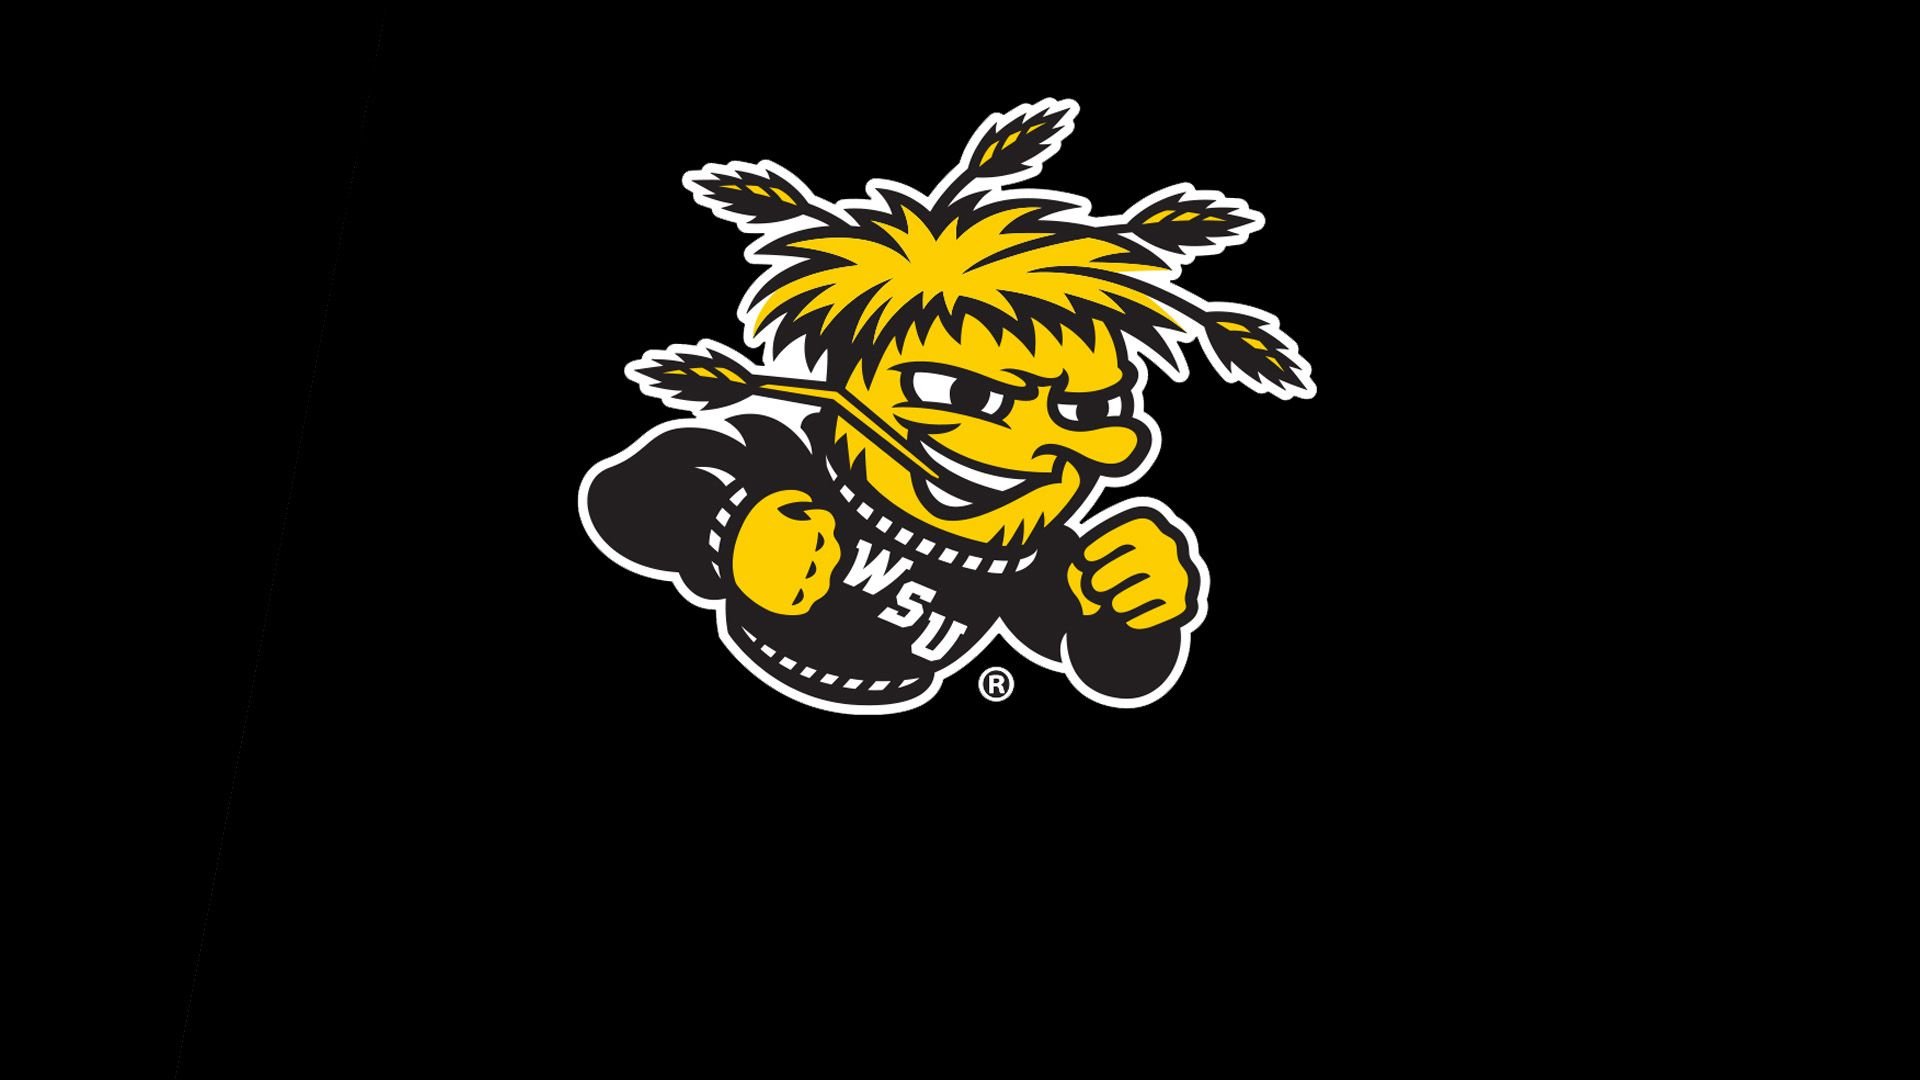 Wichita State to Become Member of the American Athletic Conference University Athletics